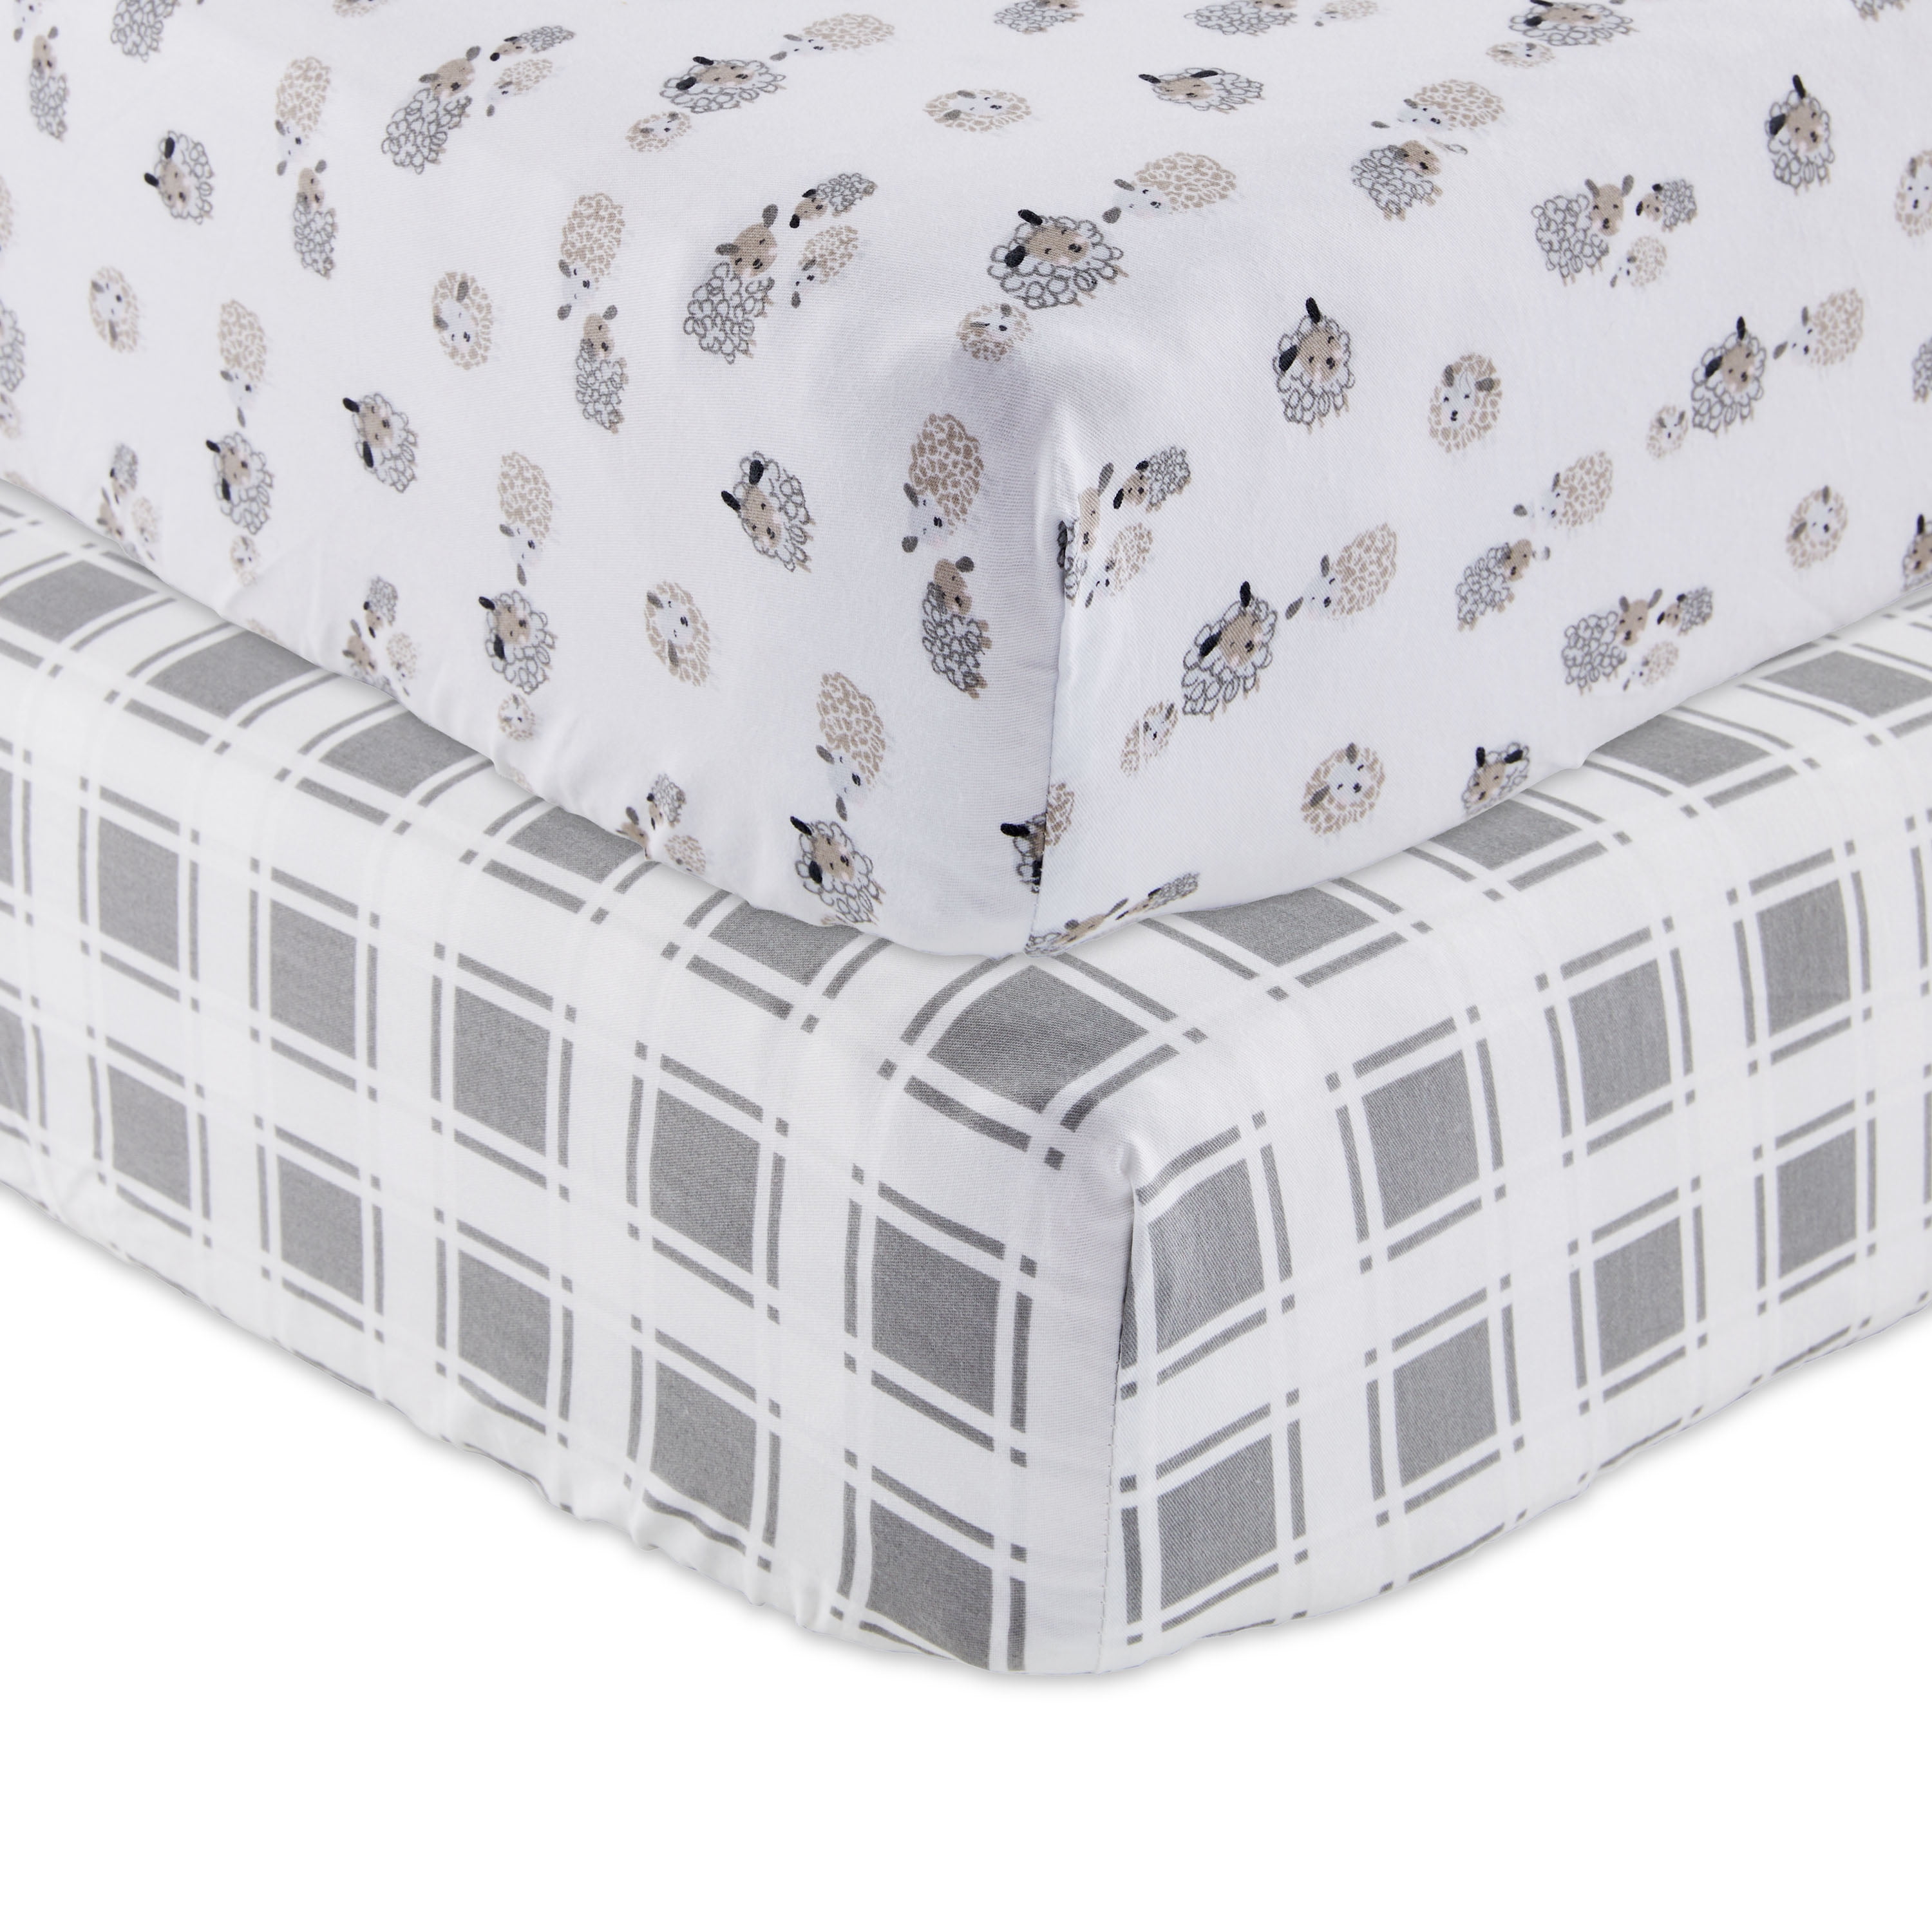 Parent's Choice 100% Cotton Fitted Crib Sheets for Baby Boys and Girls, Plaid Sheep, 2-Pack